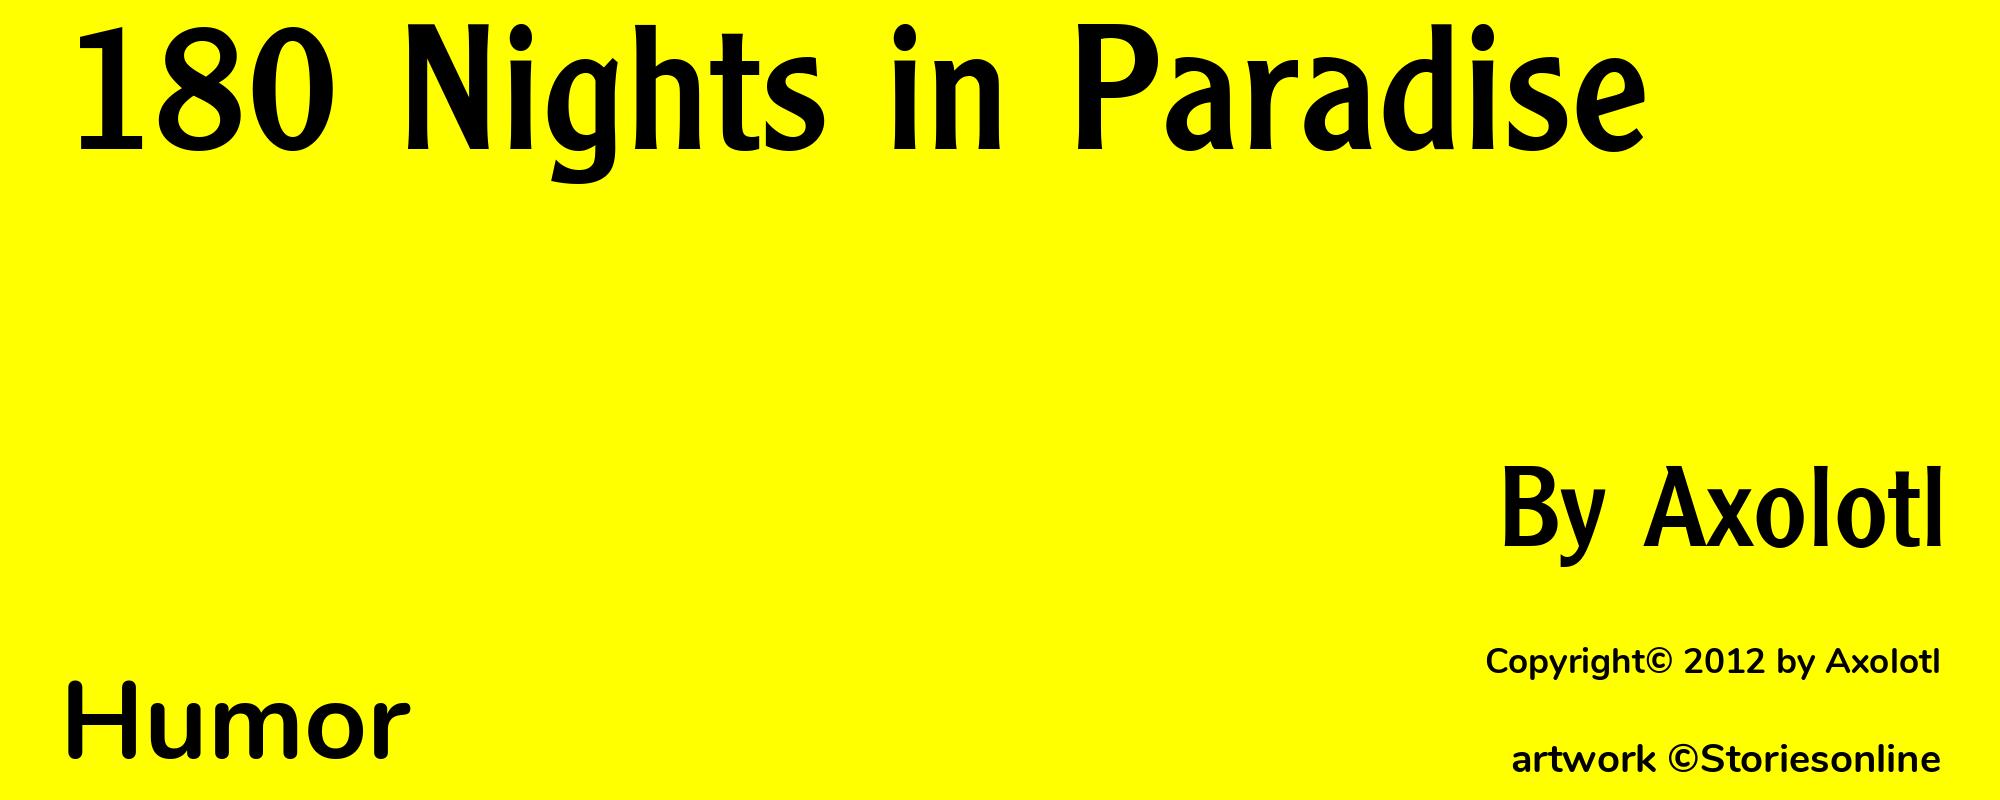 180 Nights in Paradise - Cover